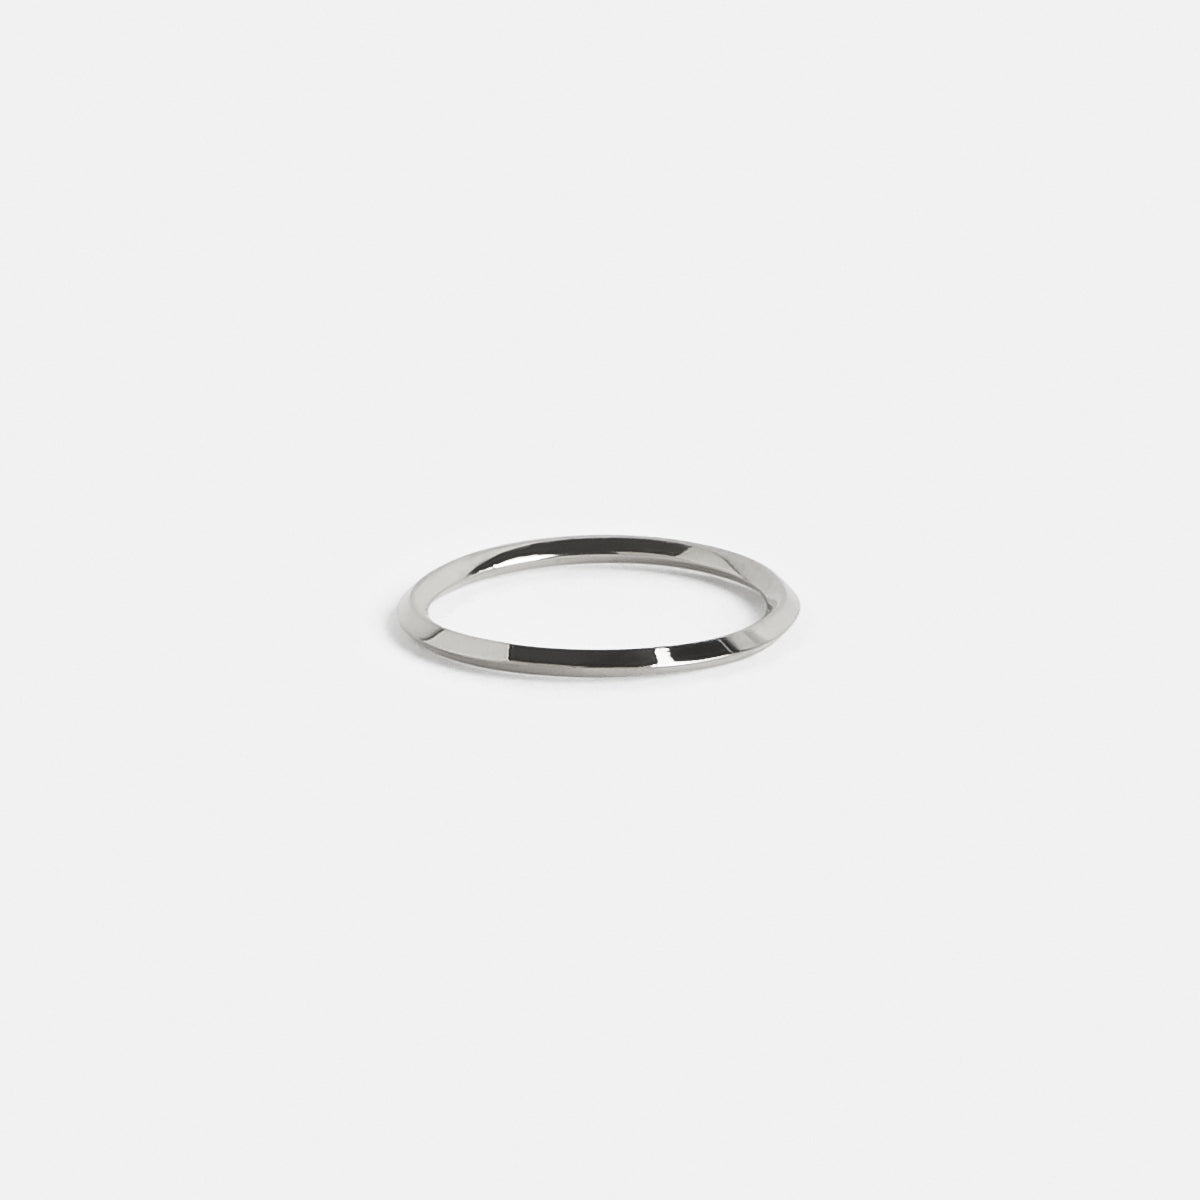 Navi Handmade Ring in 14k White Gold By SHW Fine Jewelry NYC